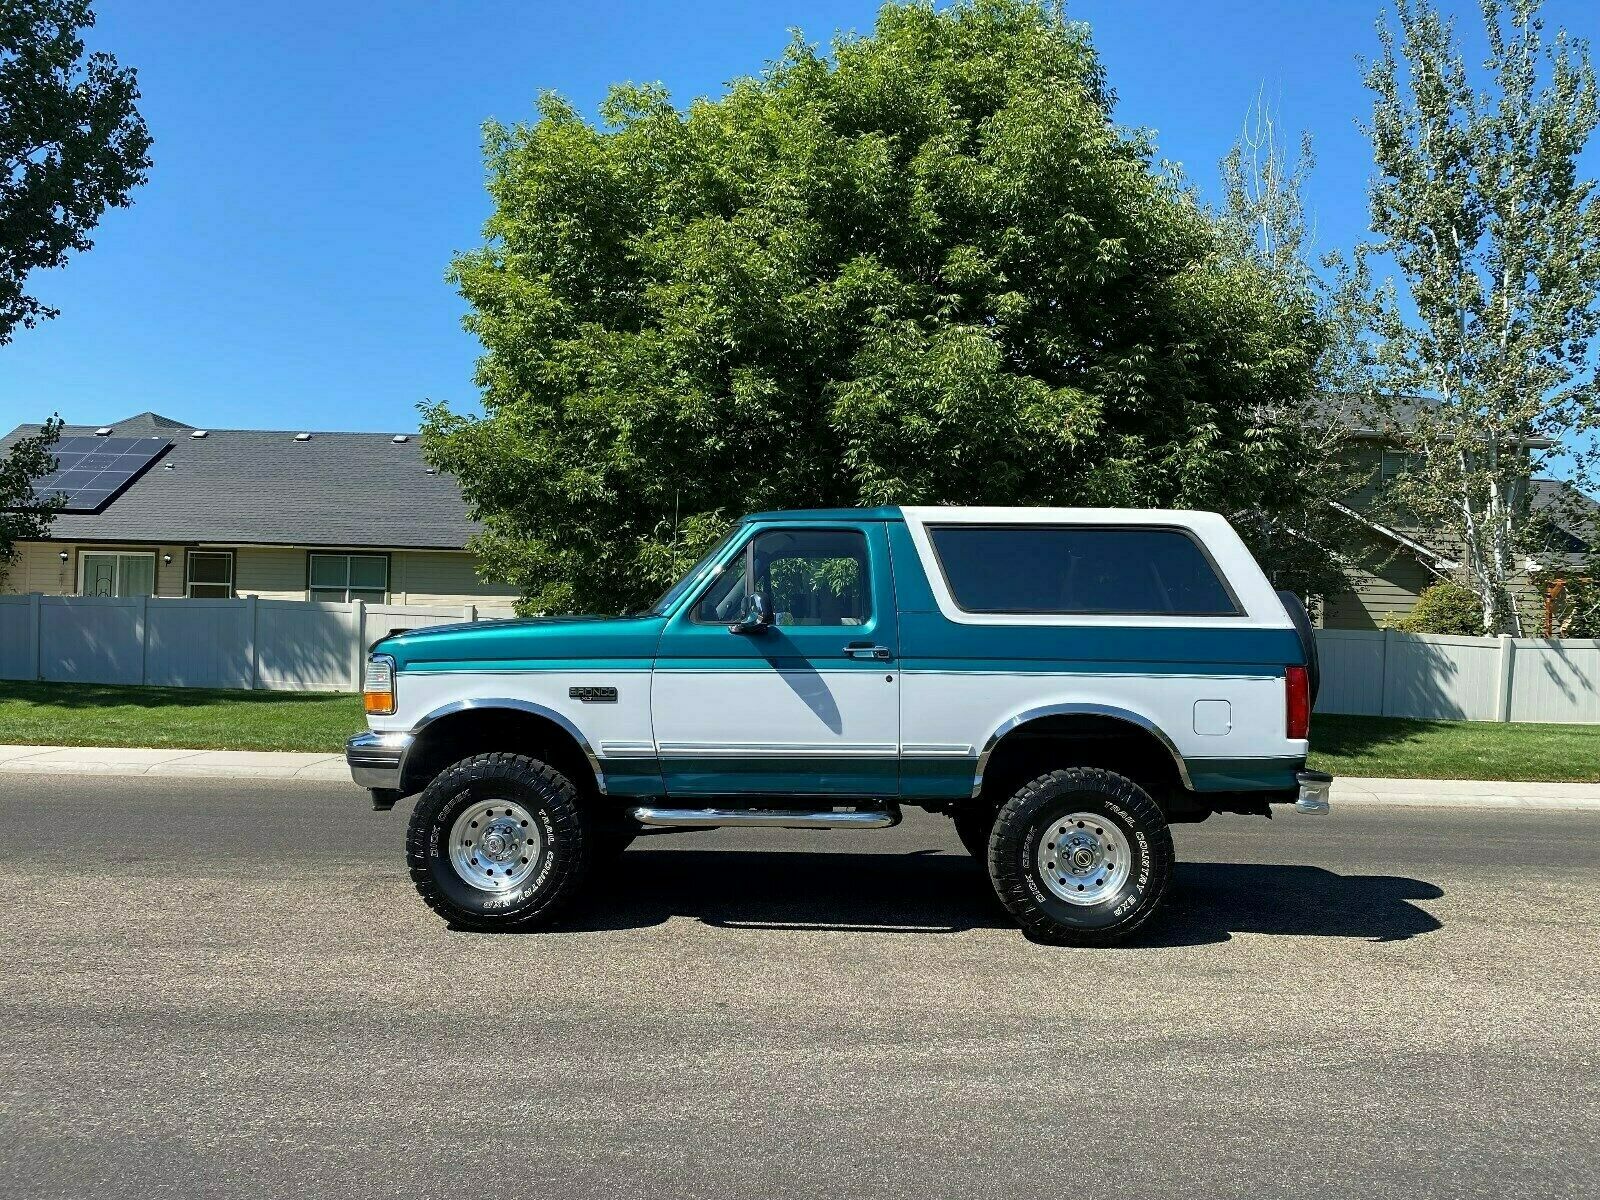 1996 Ford Bronco Xlt 1996 Ford Bronco Xlt 4x4 5.8l 351 V/8 With Only 139.294 Actual Miles